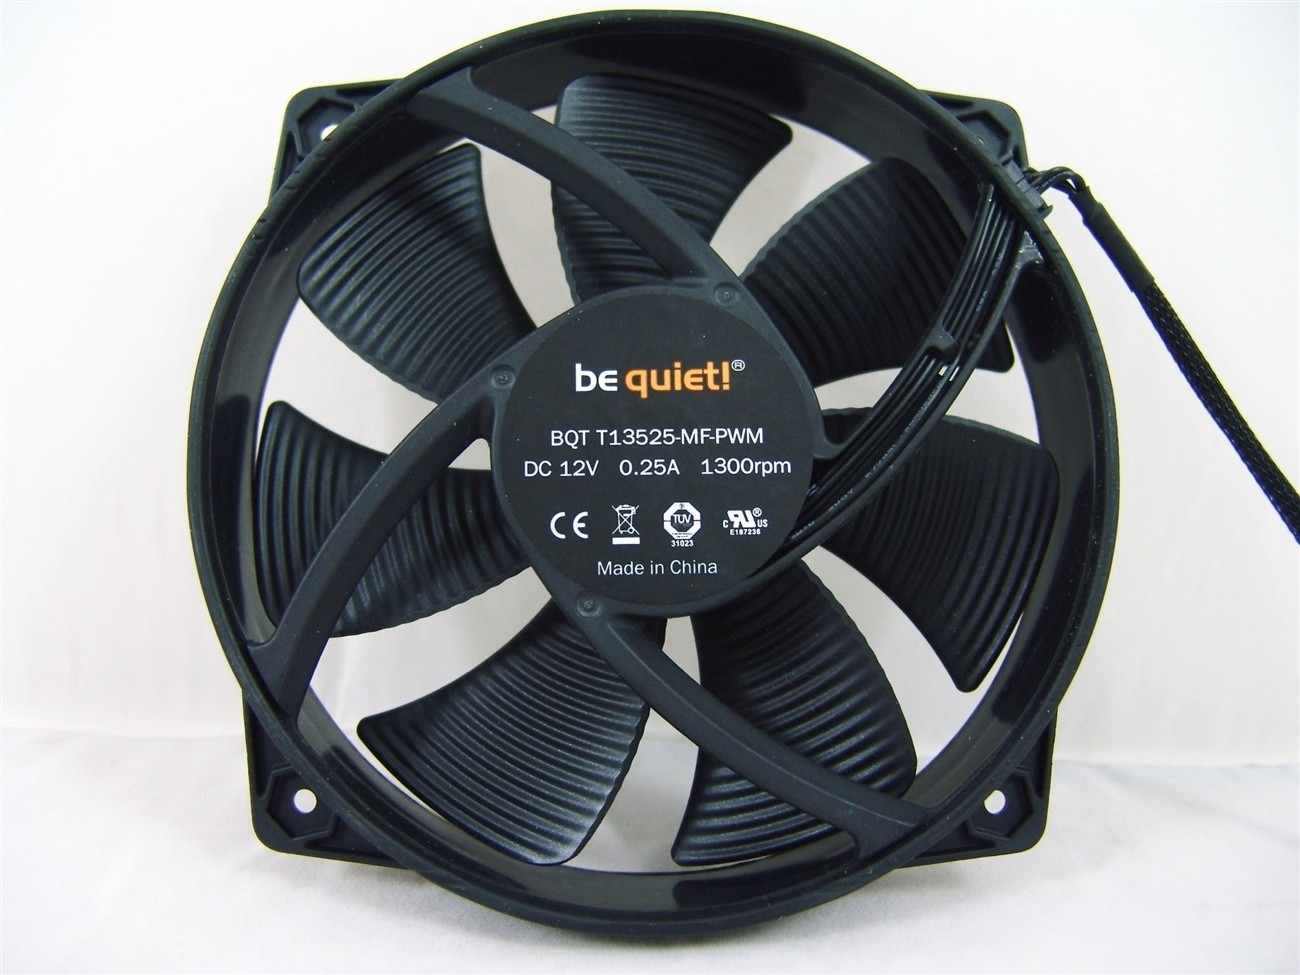 død Syndicate Northern be quiet! Dark Rock 2 CPU Cooler Review